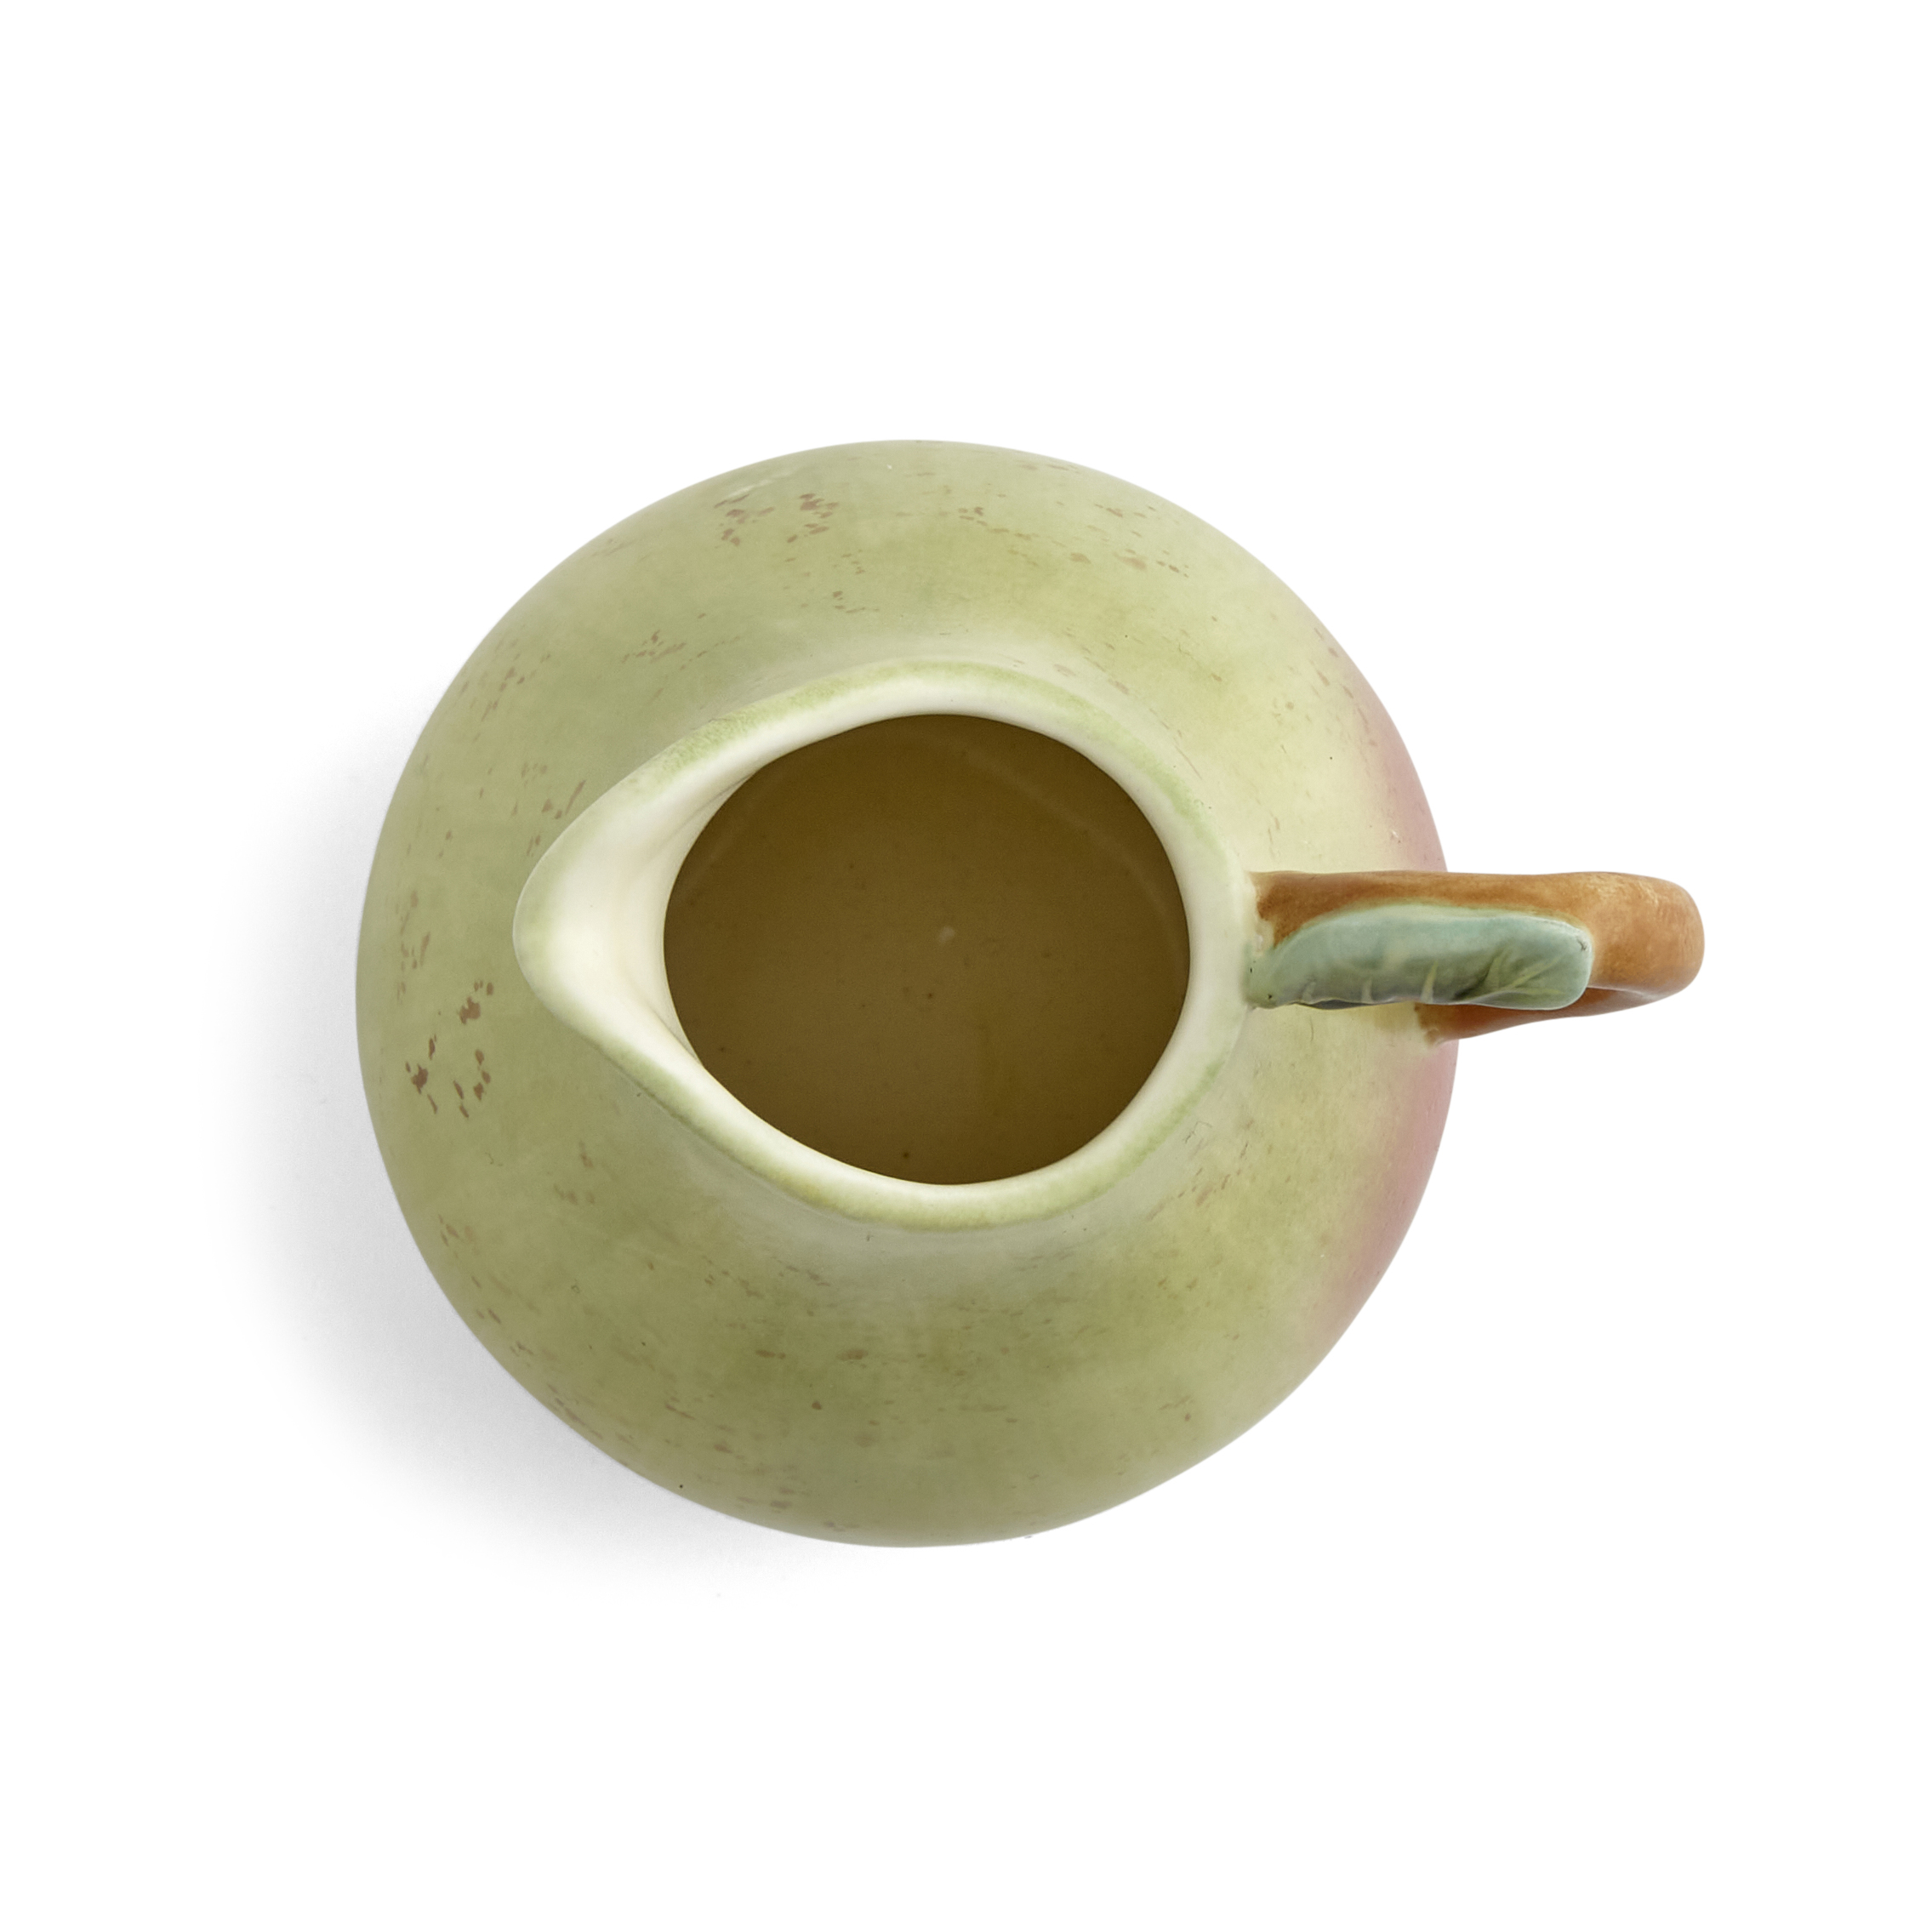 Nature's Bounty Figural Creamer (Pear) image number null